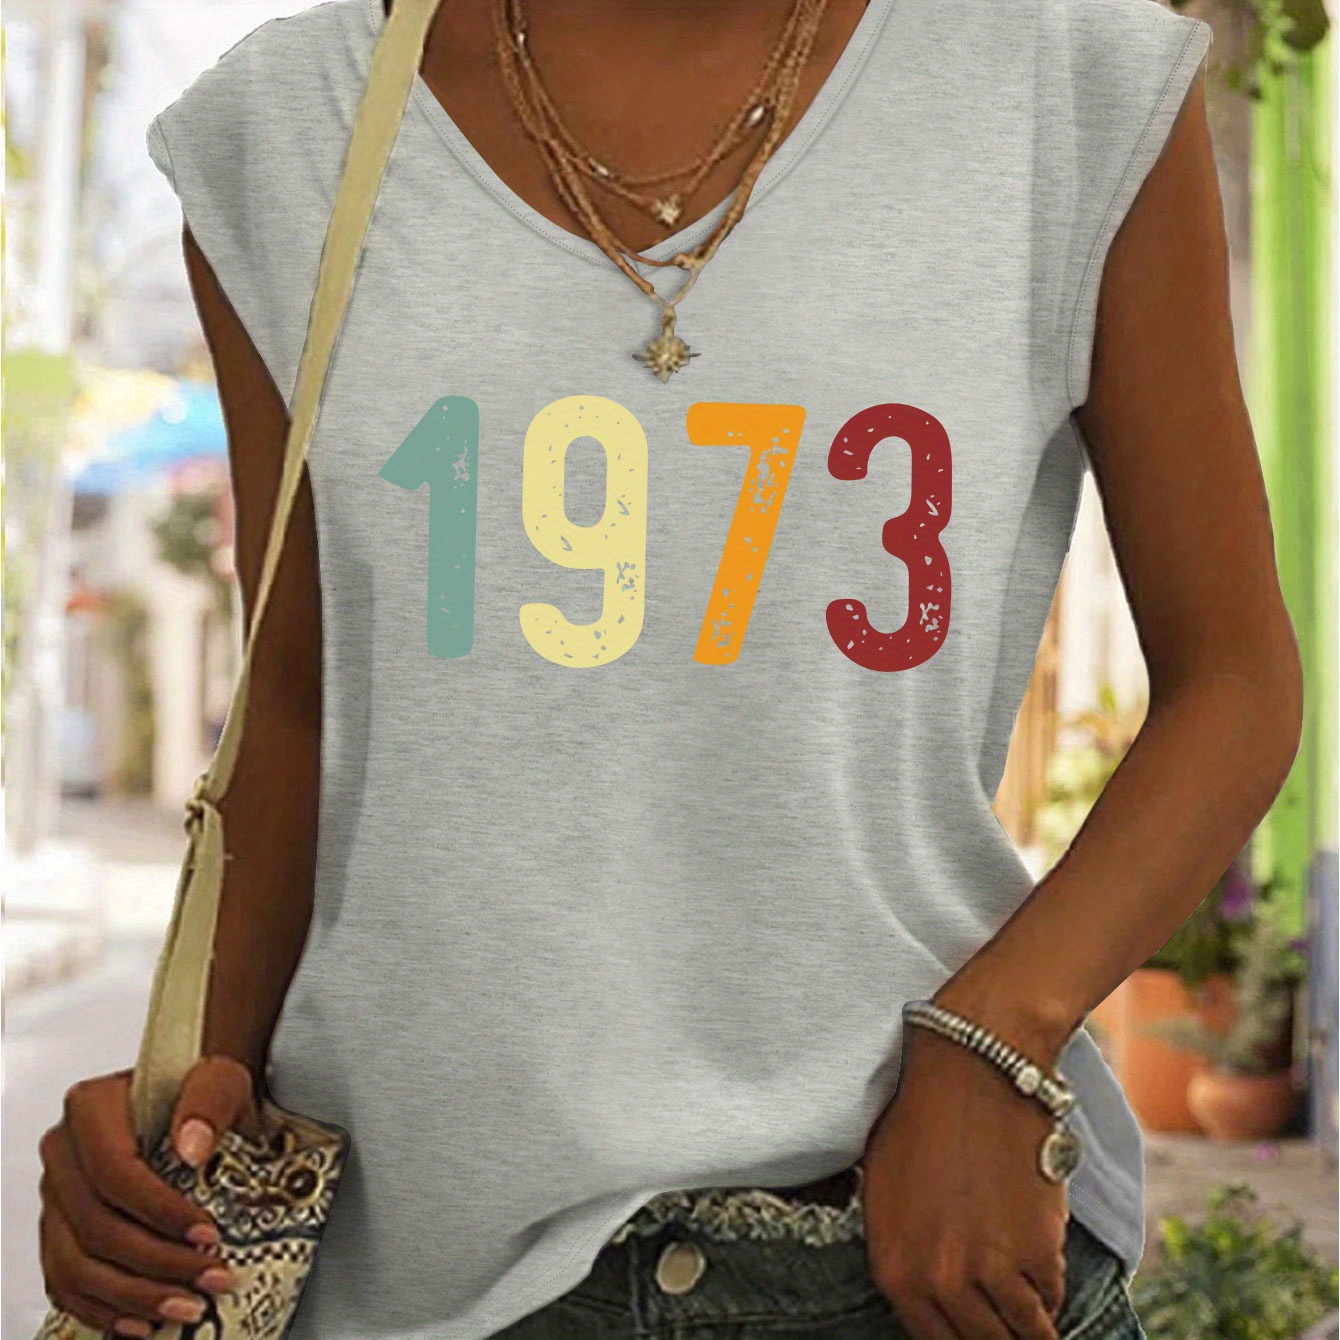 

1973 Print V Neck Top, Casual Cap Sleeve Top For Summer, Women's Clothing